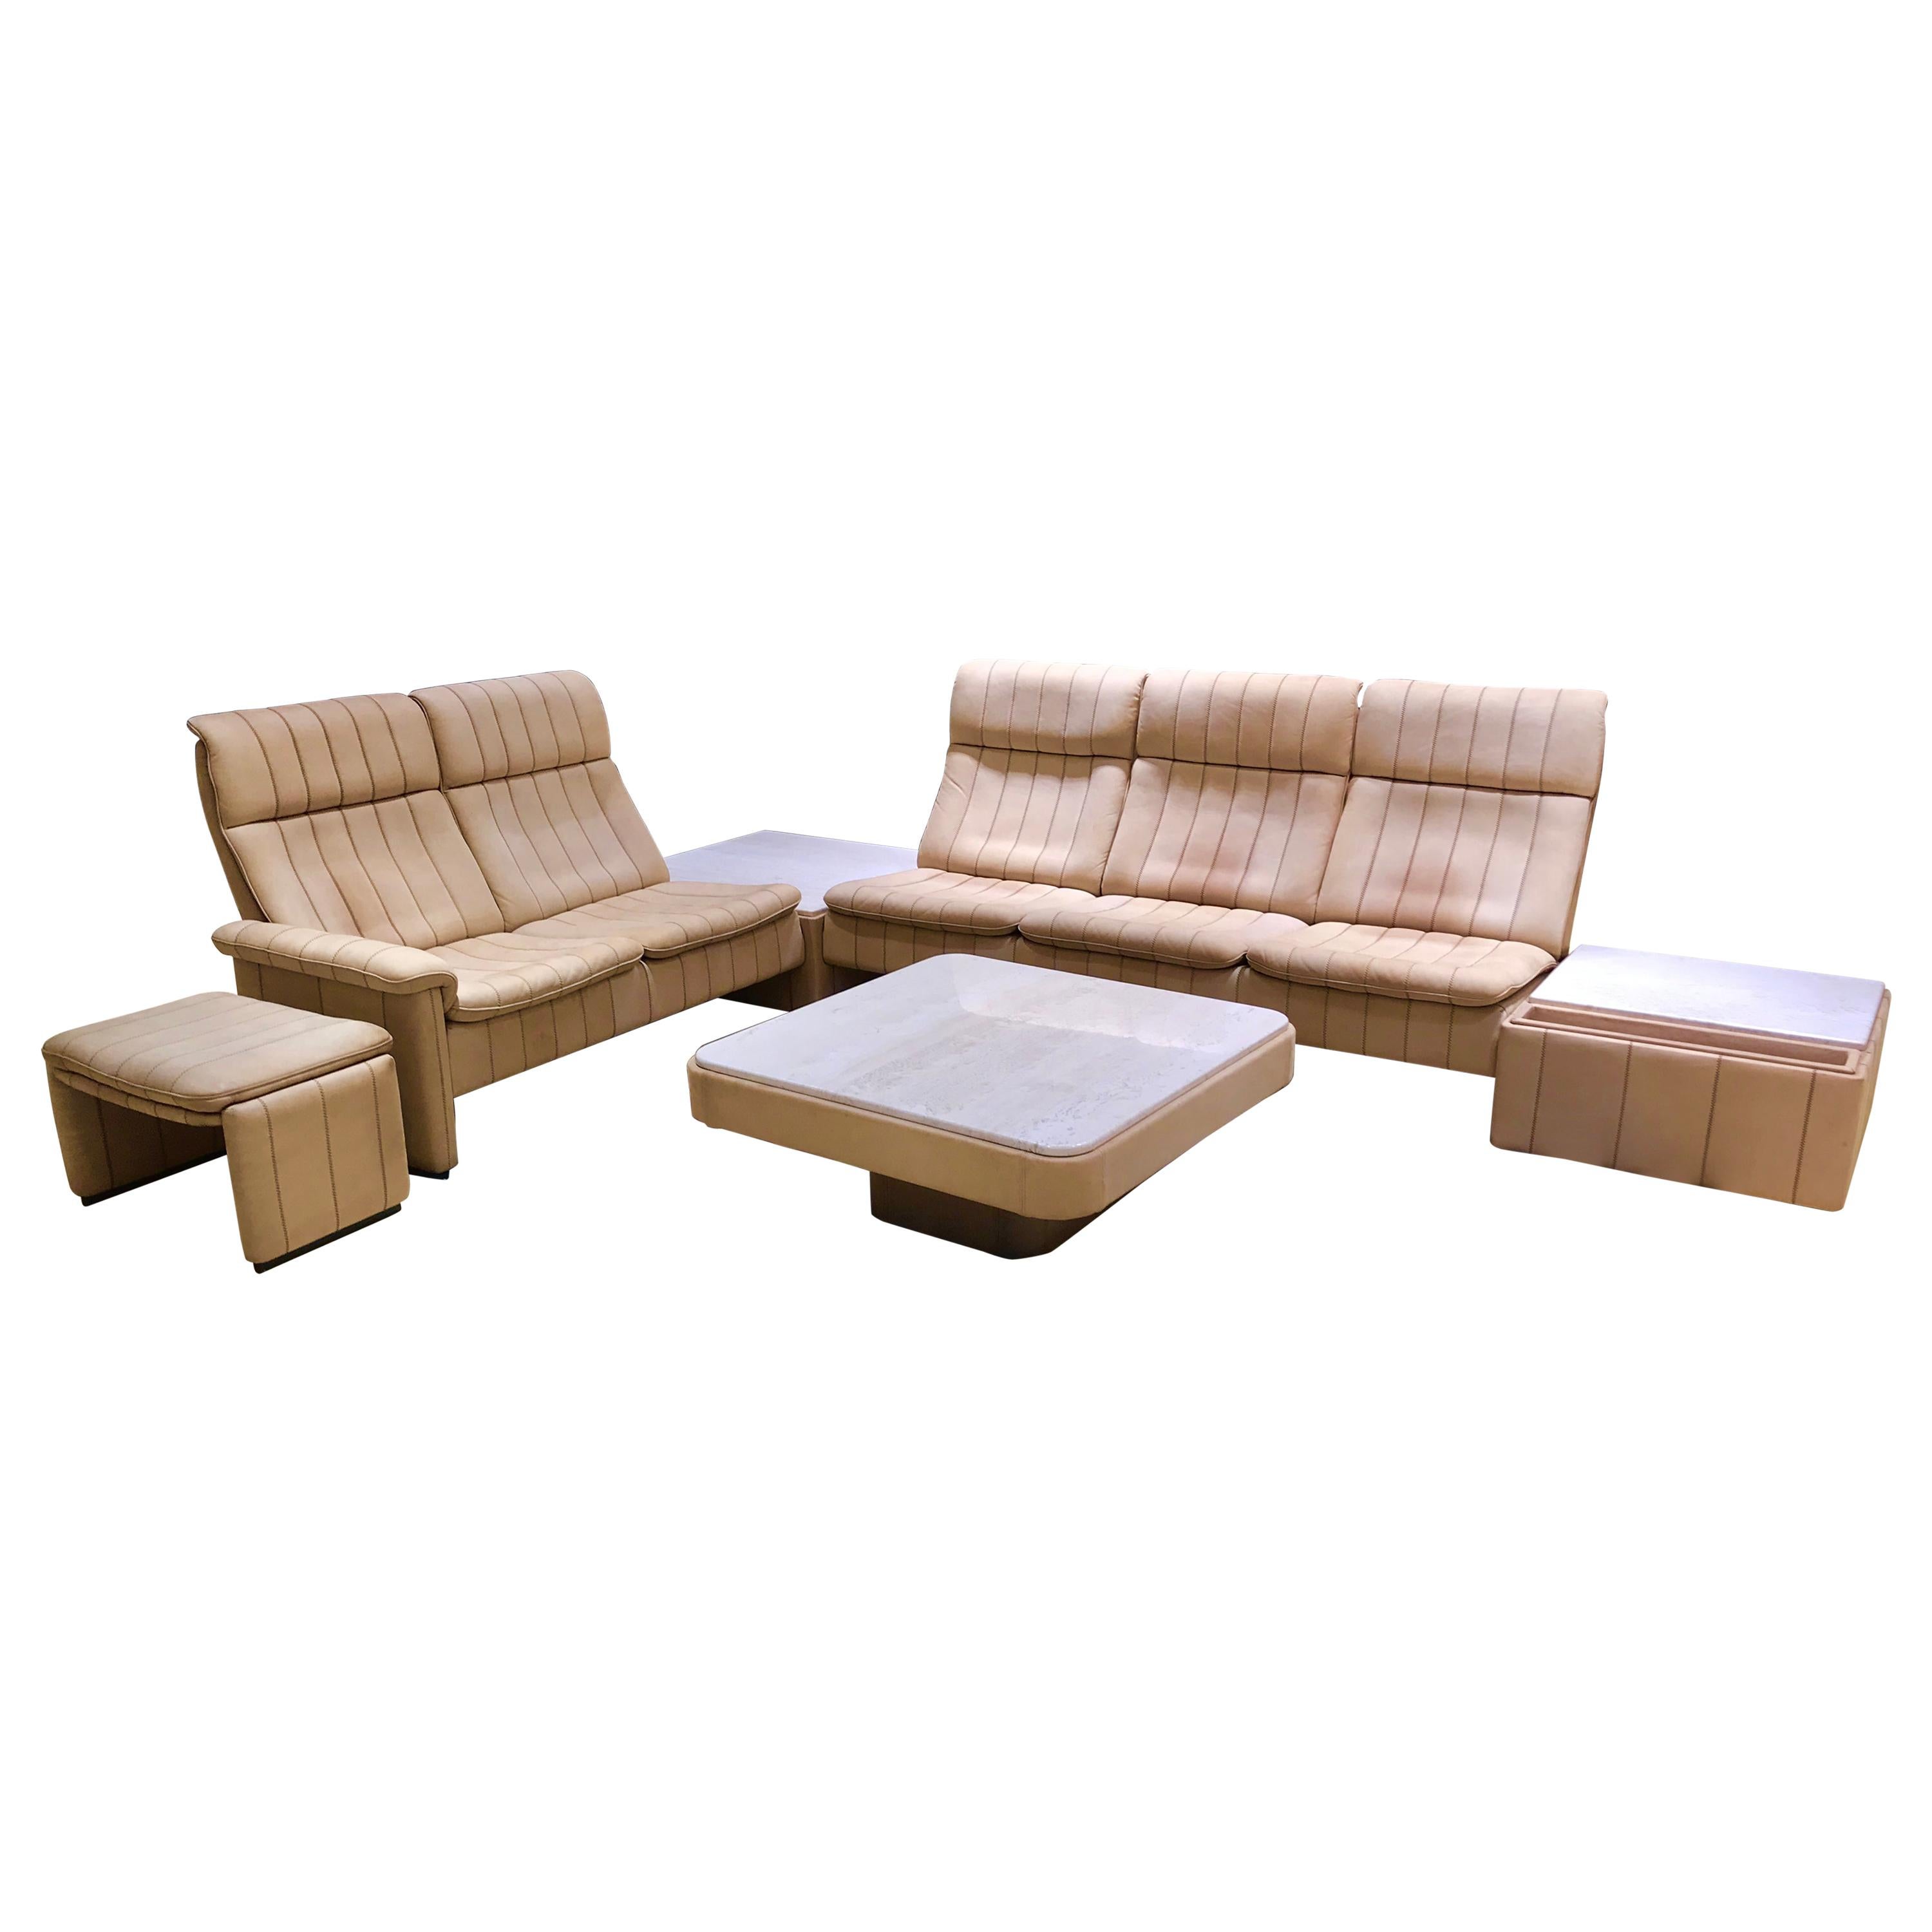 Handmade Swiss Neck-Leather Livingroom Set with Marble coffeetables by De Sede For Sale